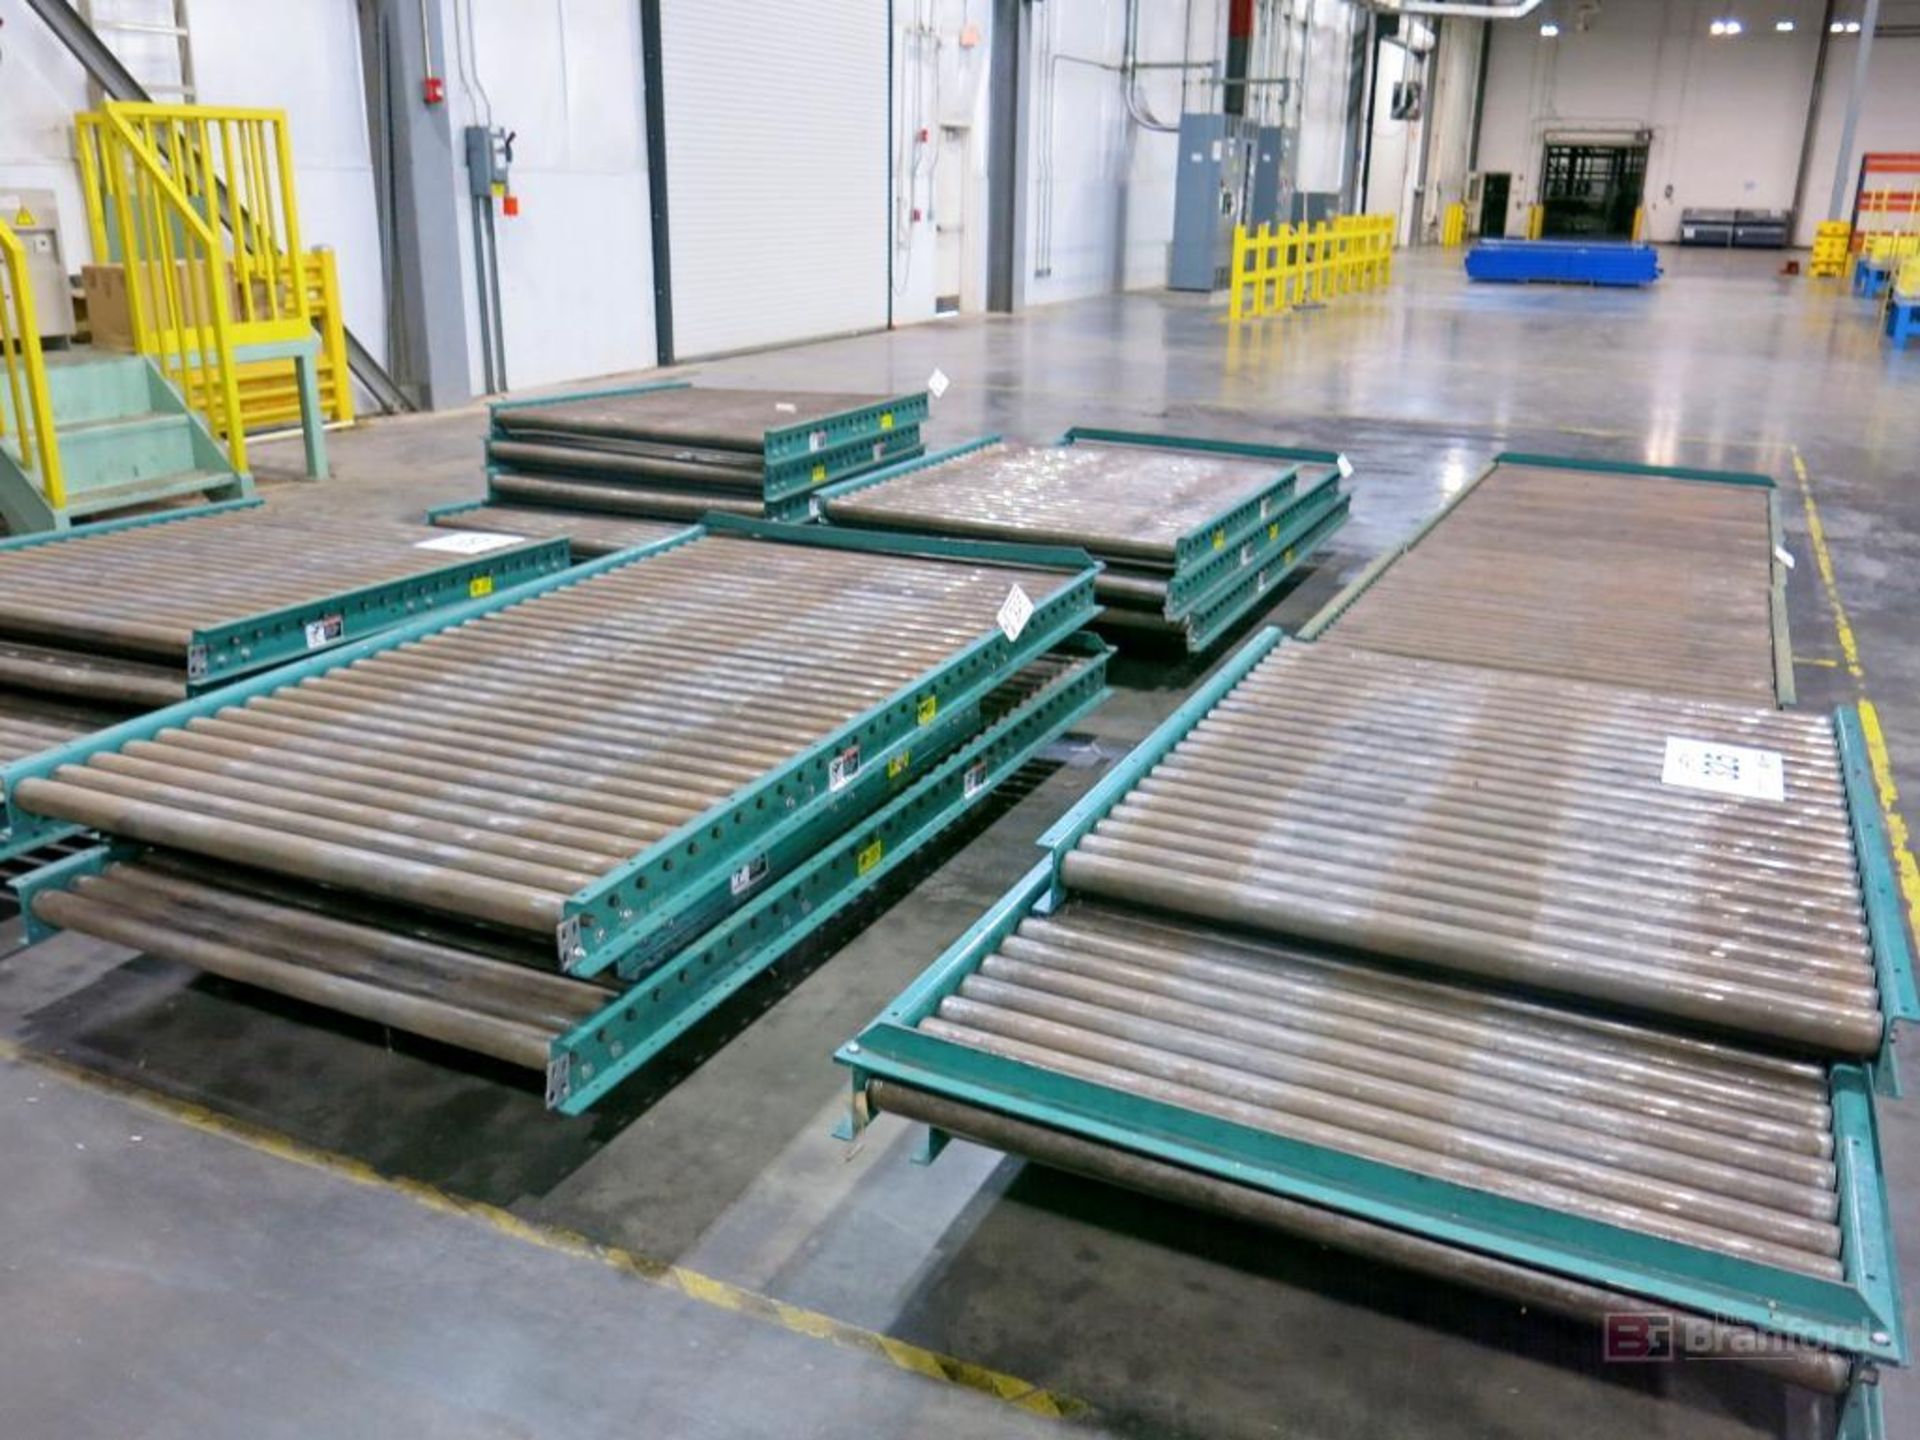 Lot of Automotive Conveyor Systems - Image 3 of 3